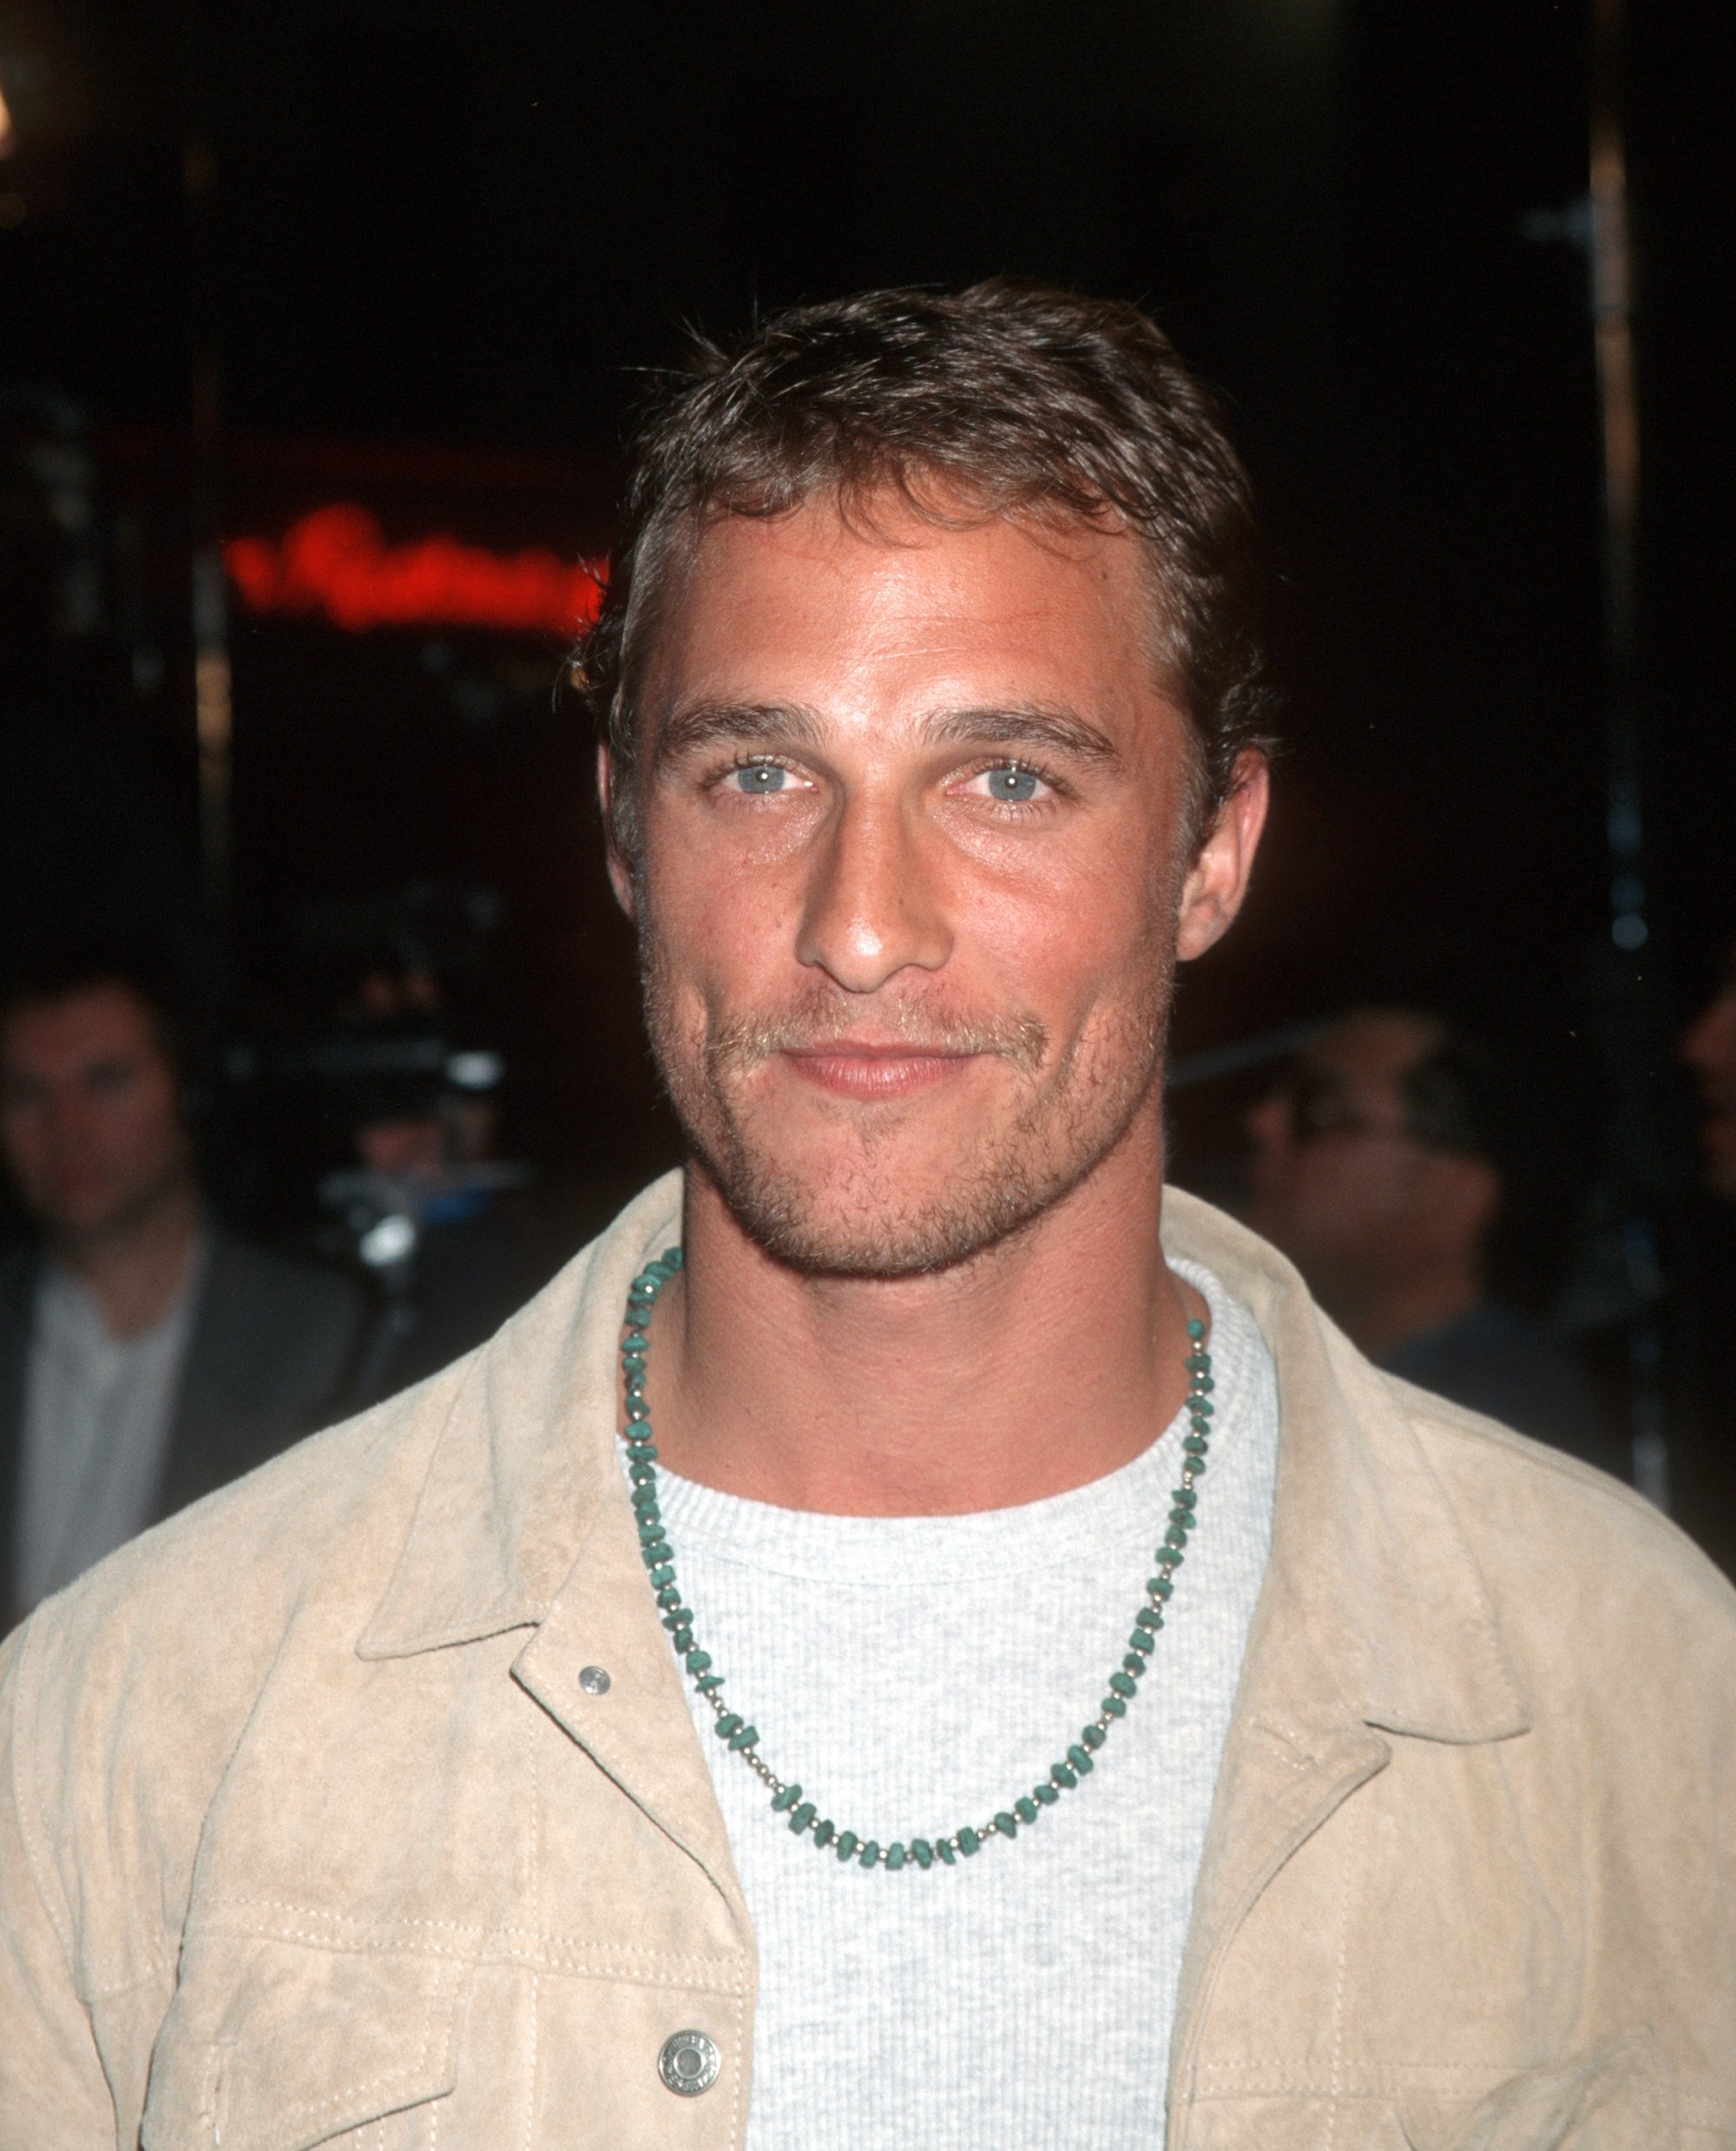 Matthew McConaughey Got This Movie Role By Accident